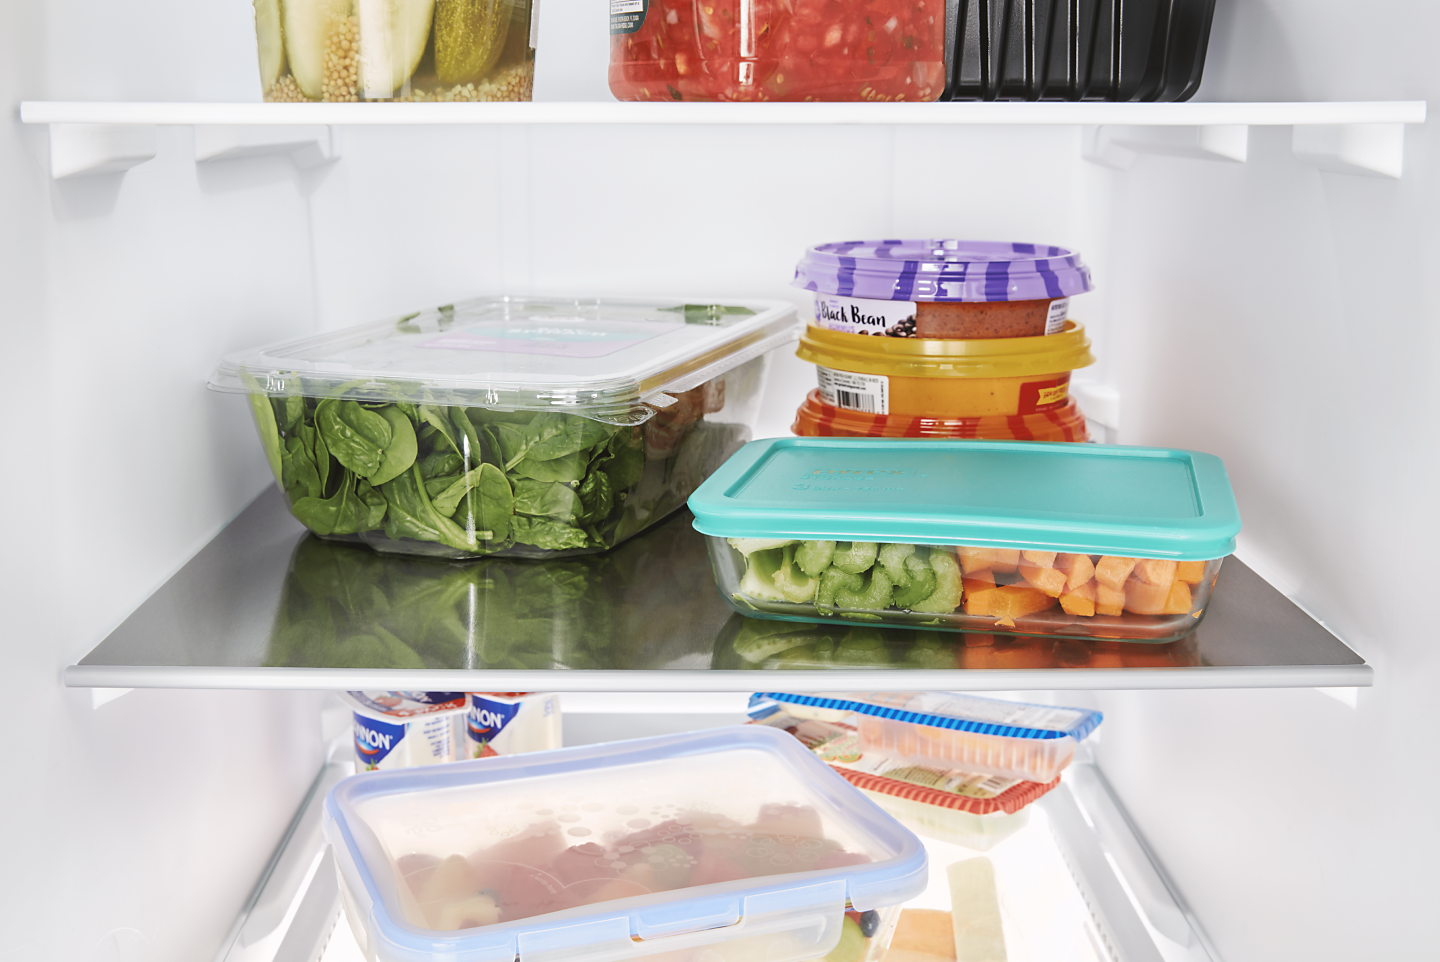 Produce and leftovers in storage containers on the shelf of a fridge